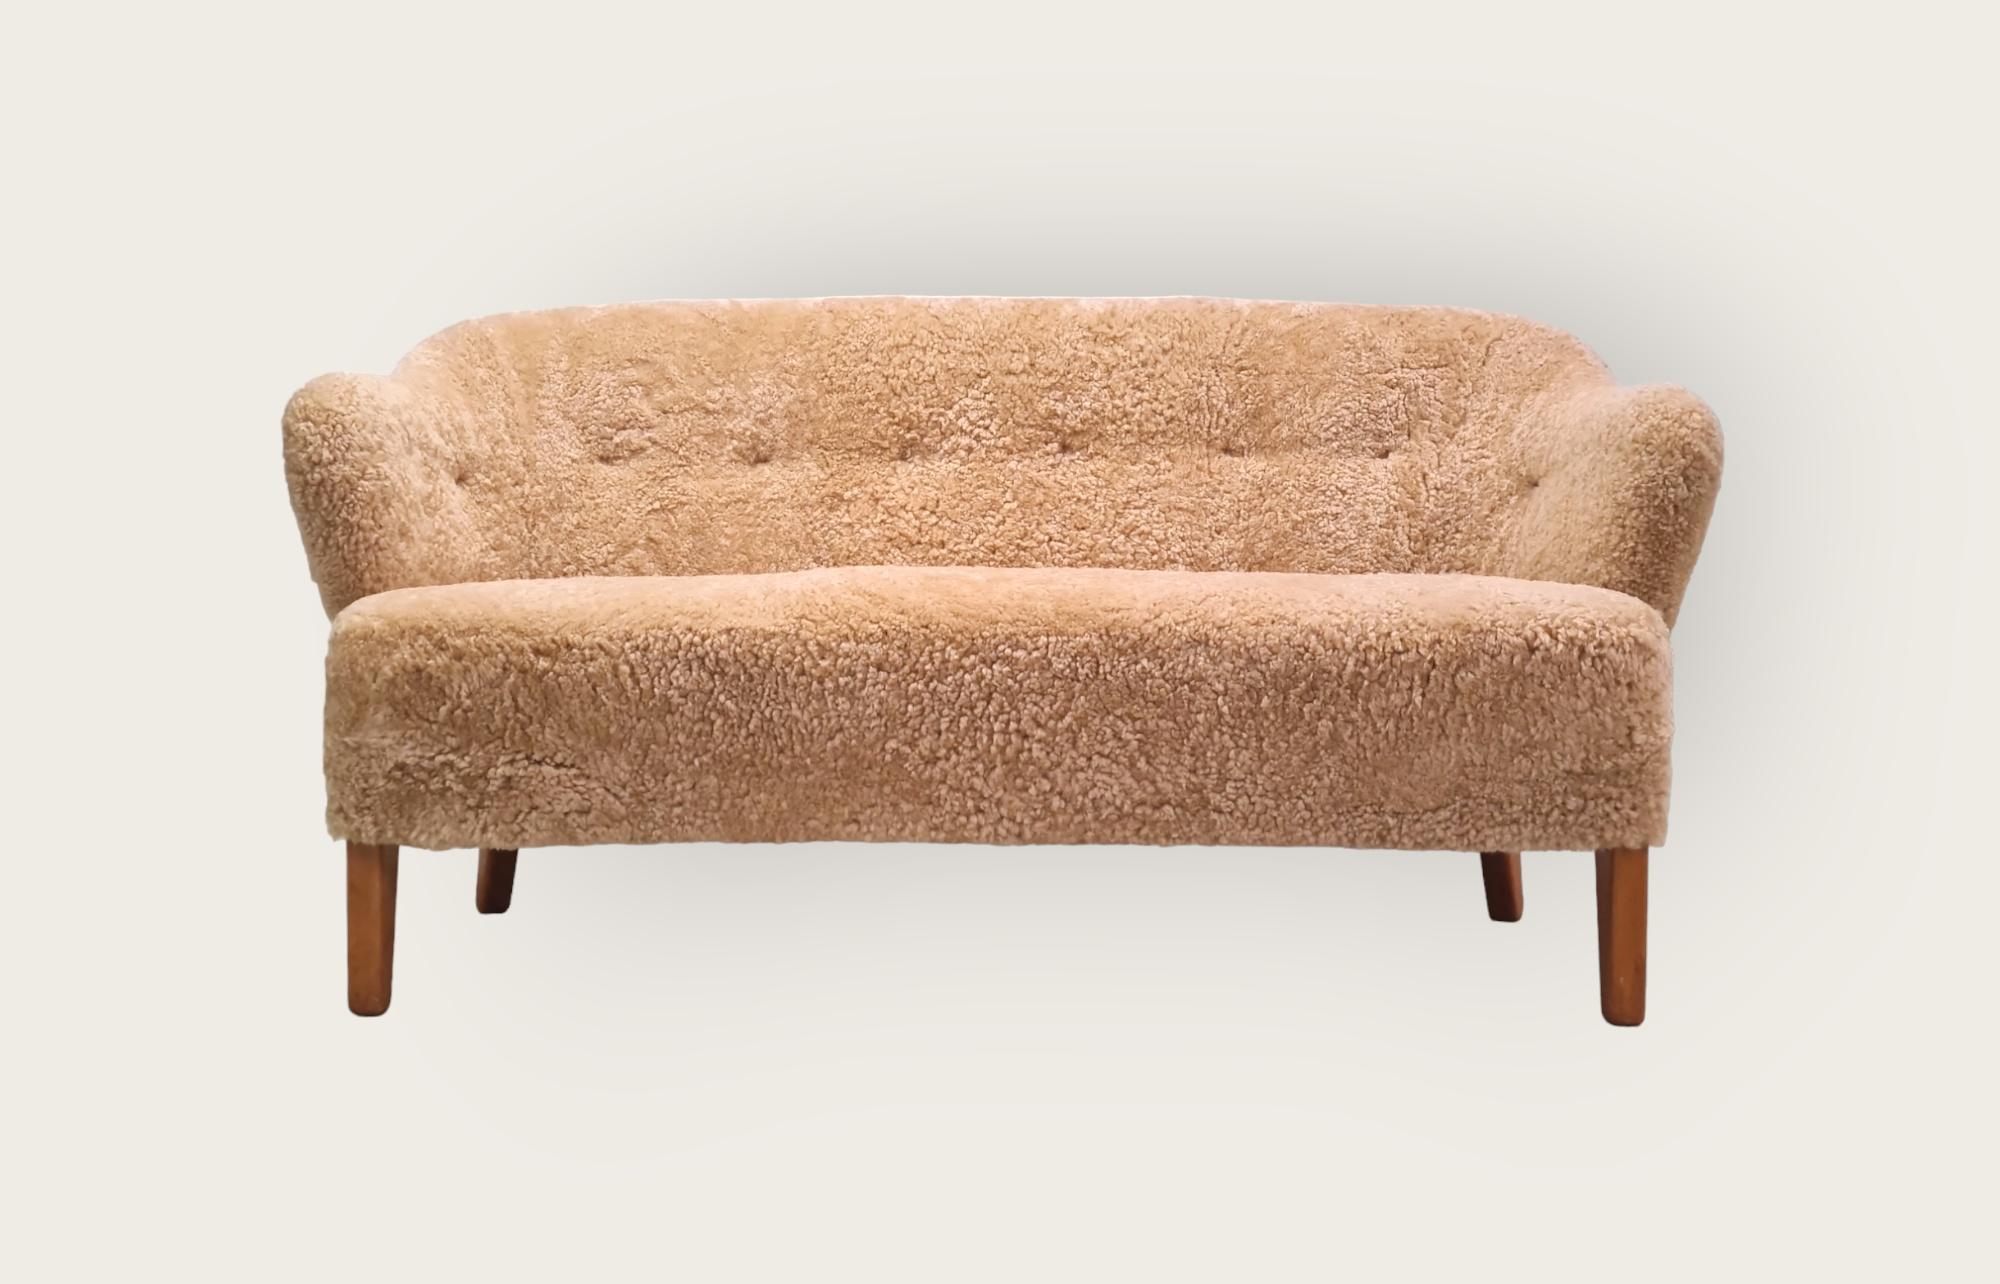 A neat and functional lounge sofa by danish architect Flemming Lassen (1902-1984). The Ingeborg series (sofa and chair) has been named after Flemming Lassen’s beloved mother, artist Ingeborg Winding. This sofa was manufactured by Asko in the